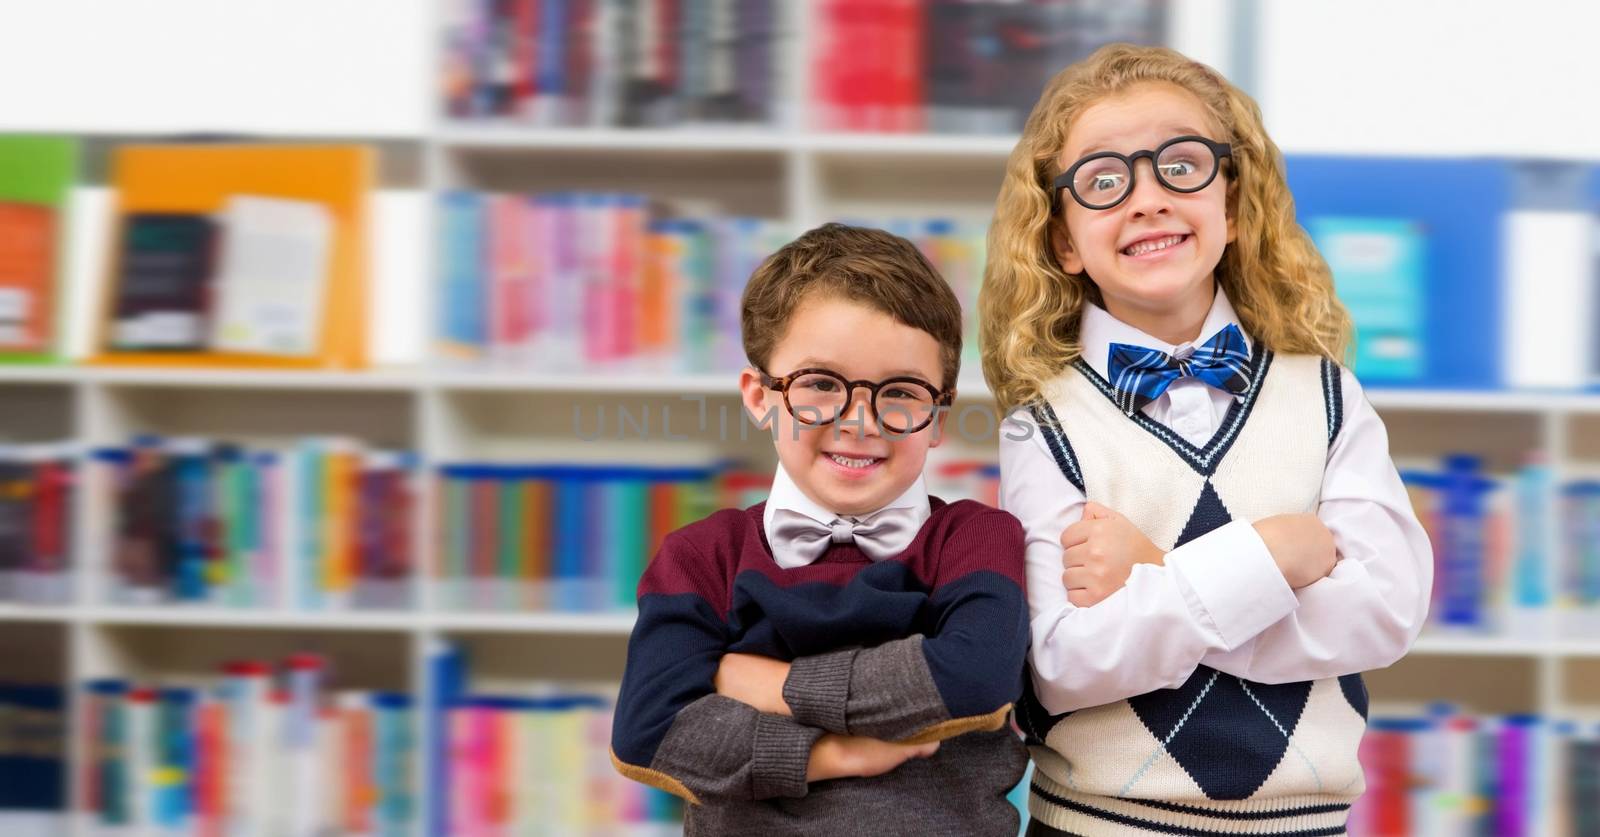 Boy and girl in education library by Wavebreakmedia